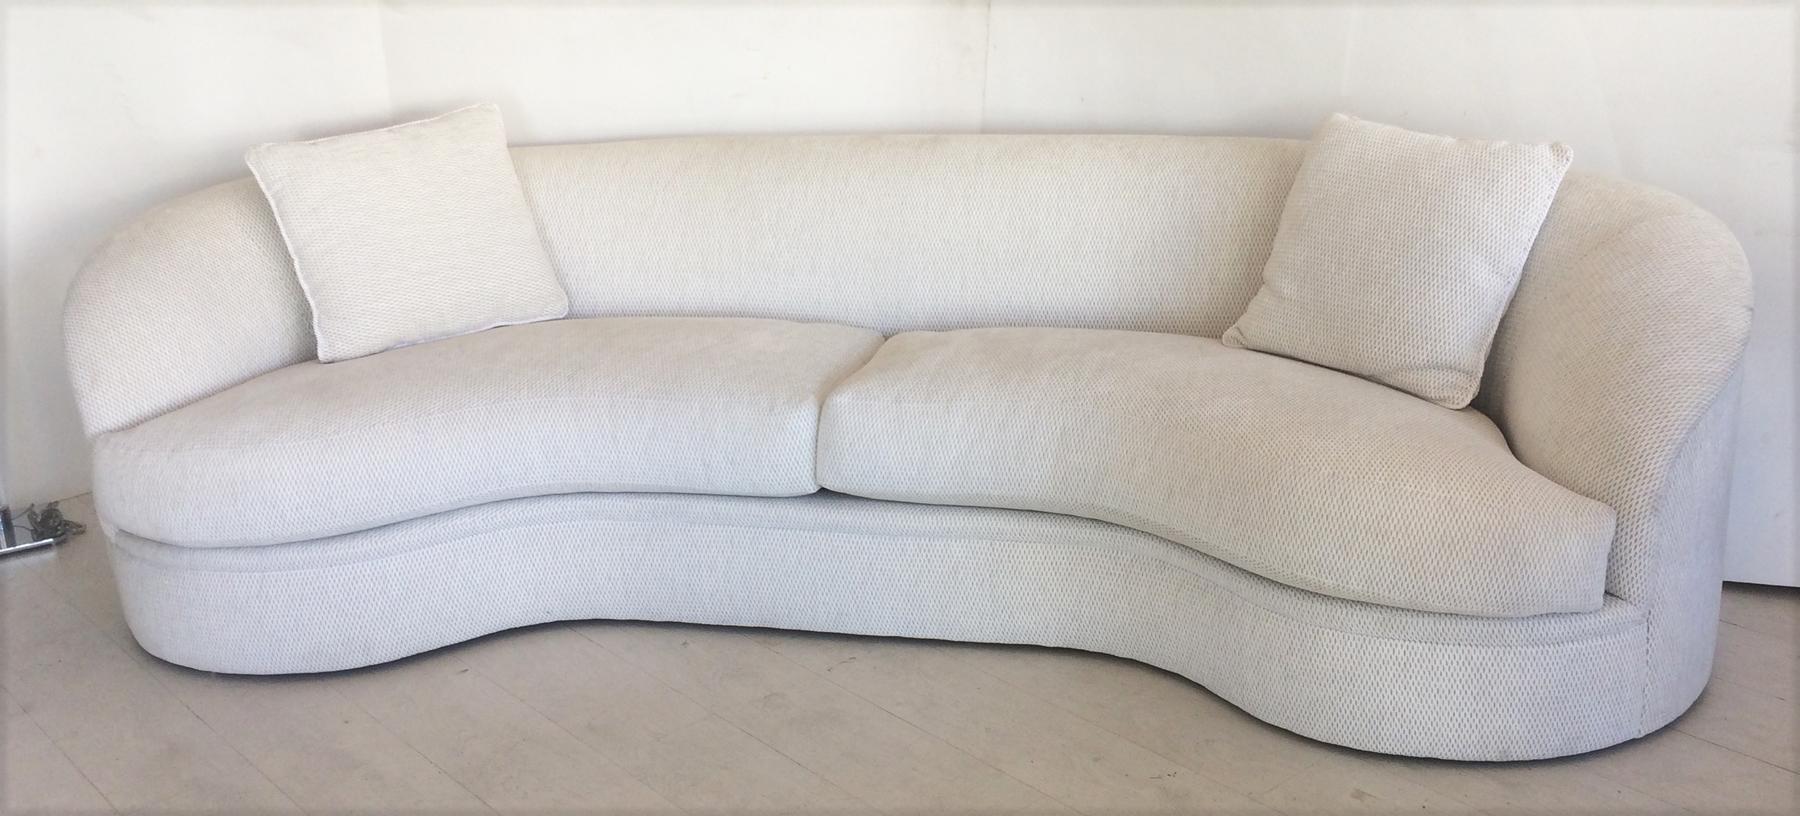 Large curved sofa designed by Kagan for Directional. Very well constructed, heavy comfortable kidney bean shaped sofa comes with two throw pillows. We have two of these sofas both identical. From a very clean estate.